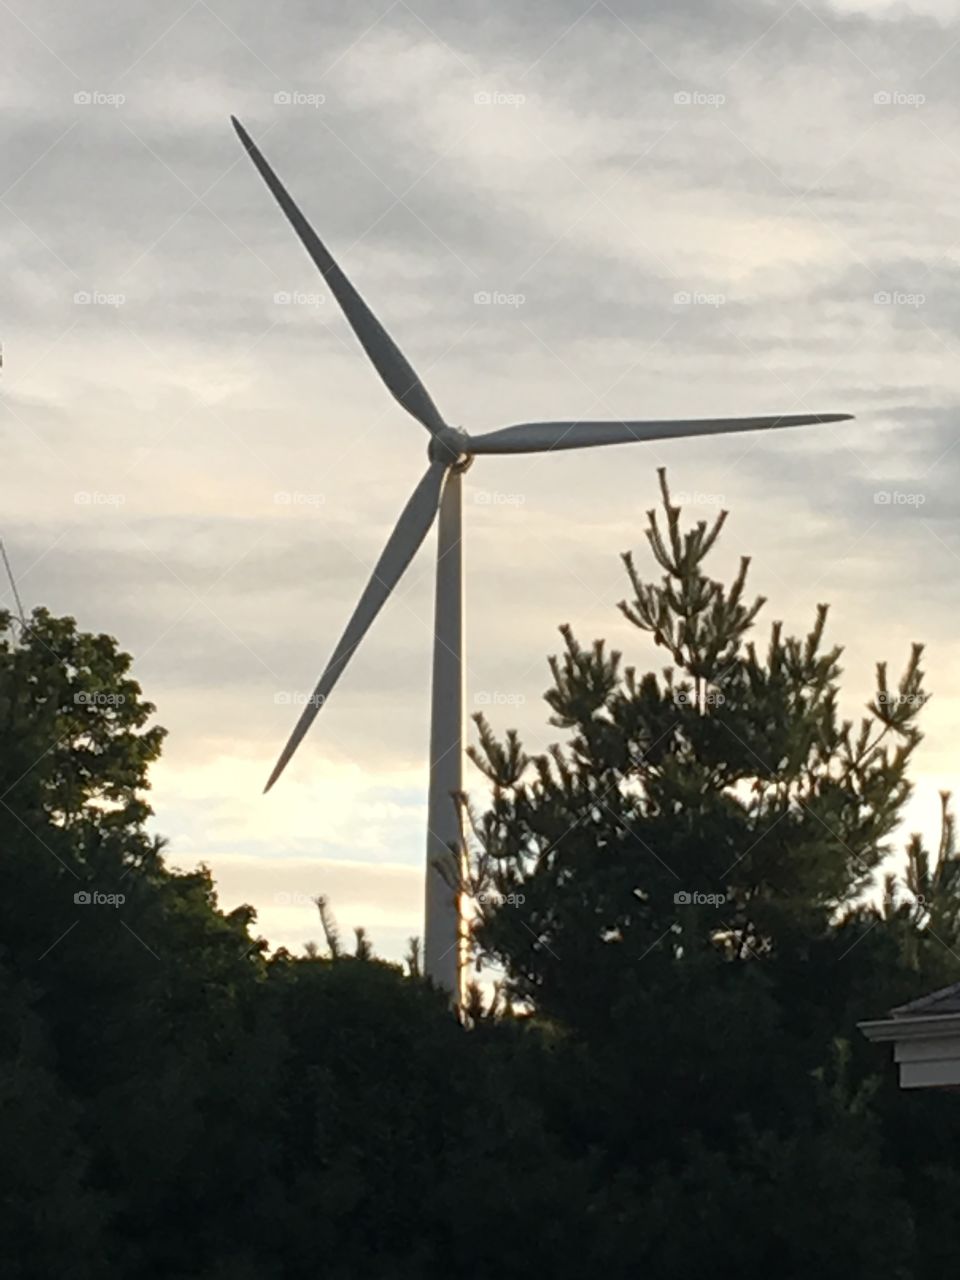 A wind turbine sits over the tree line just as the sun begins to set